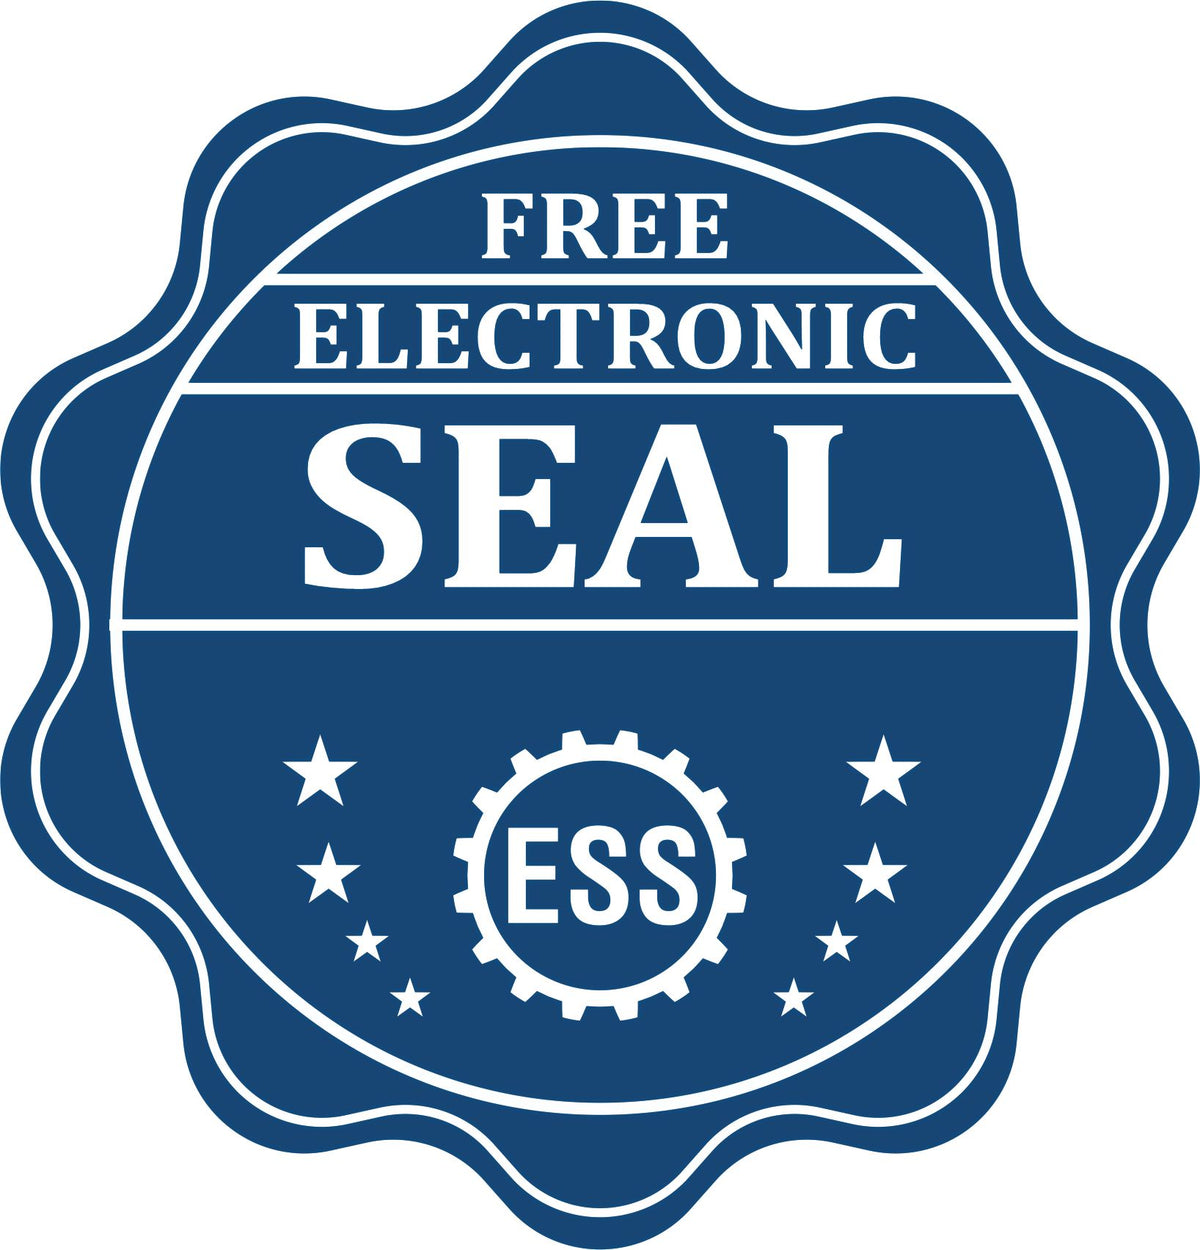 A badge showing a free electronic seal for the Extended Long Reach Alaska Architect Seal Embosser with stars and the ESS gear on the emblem.